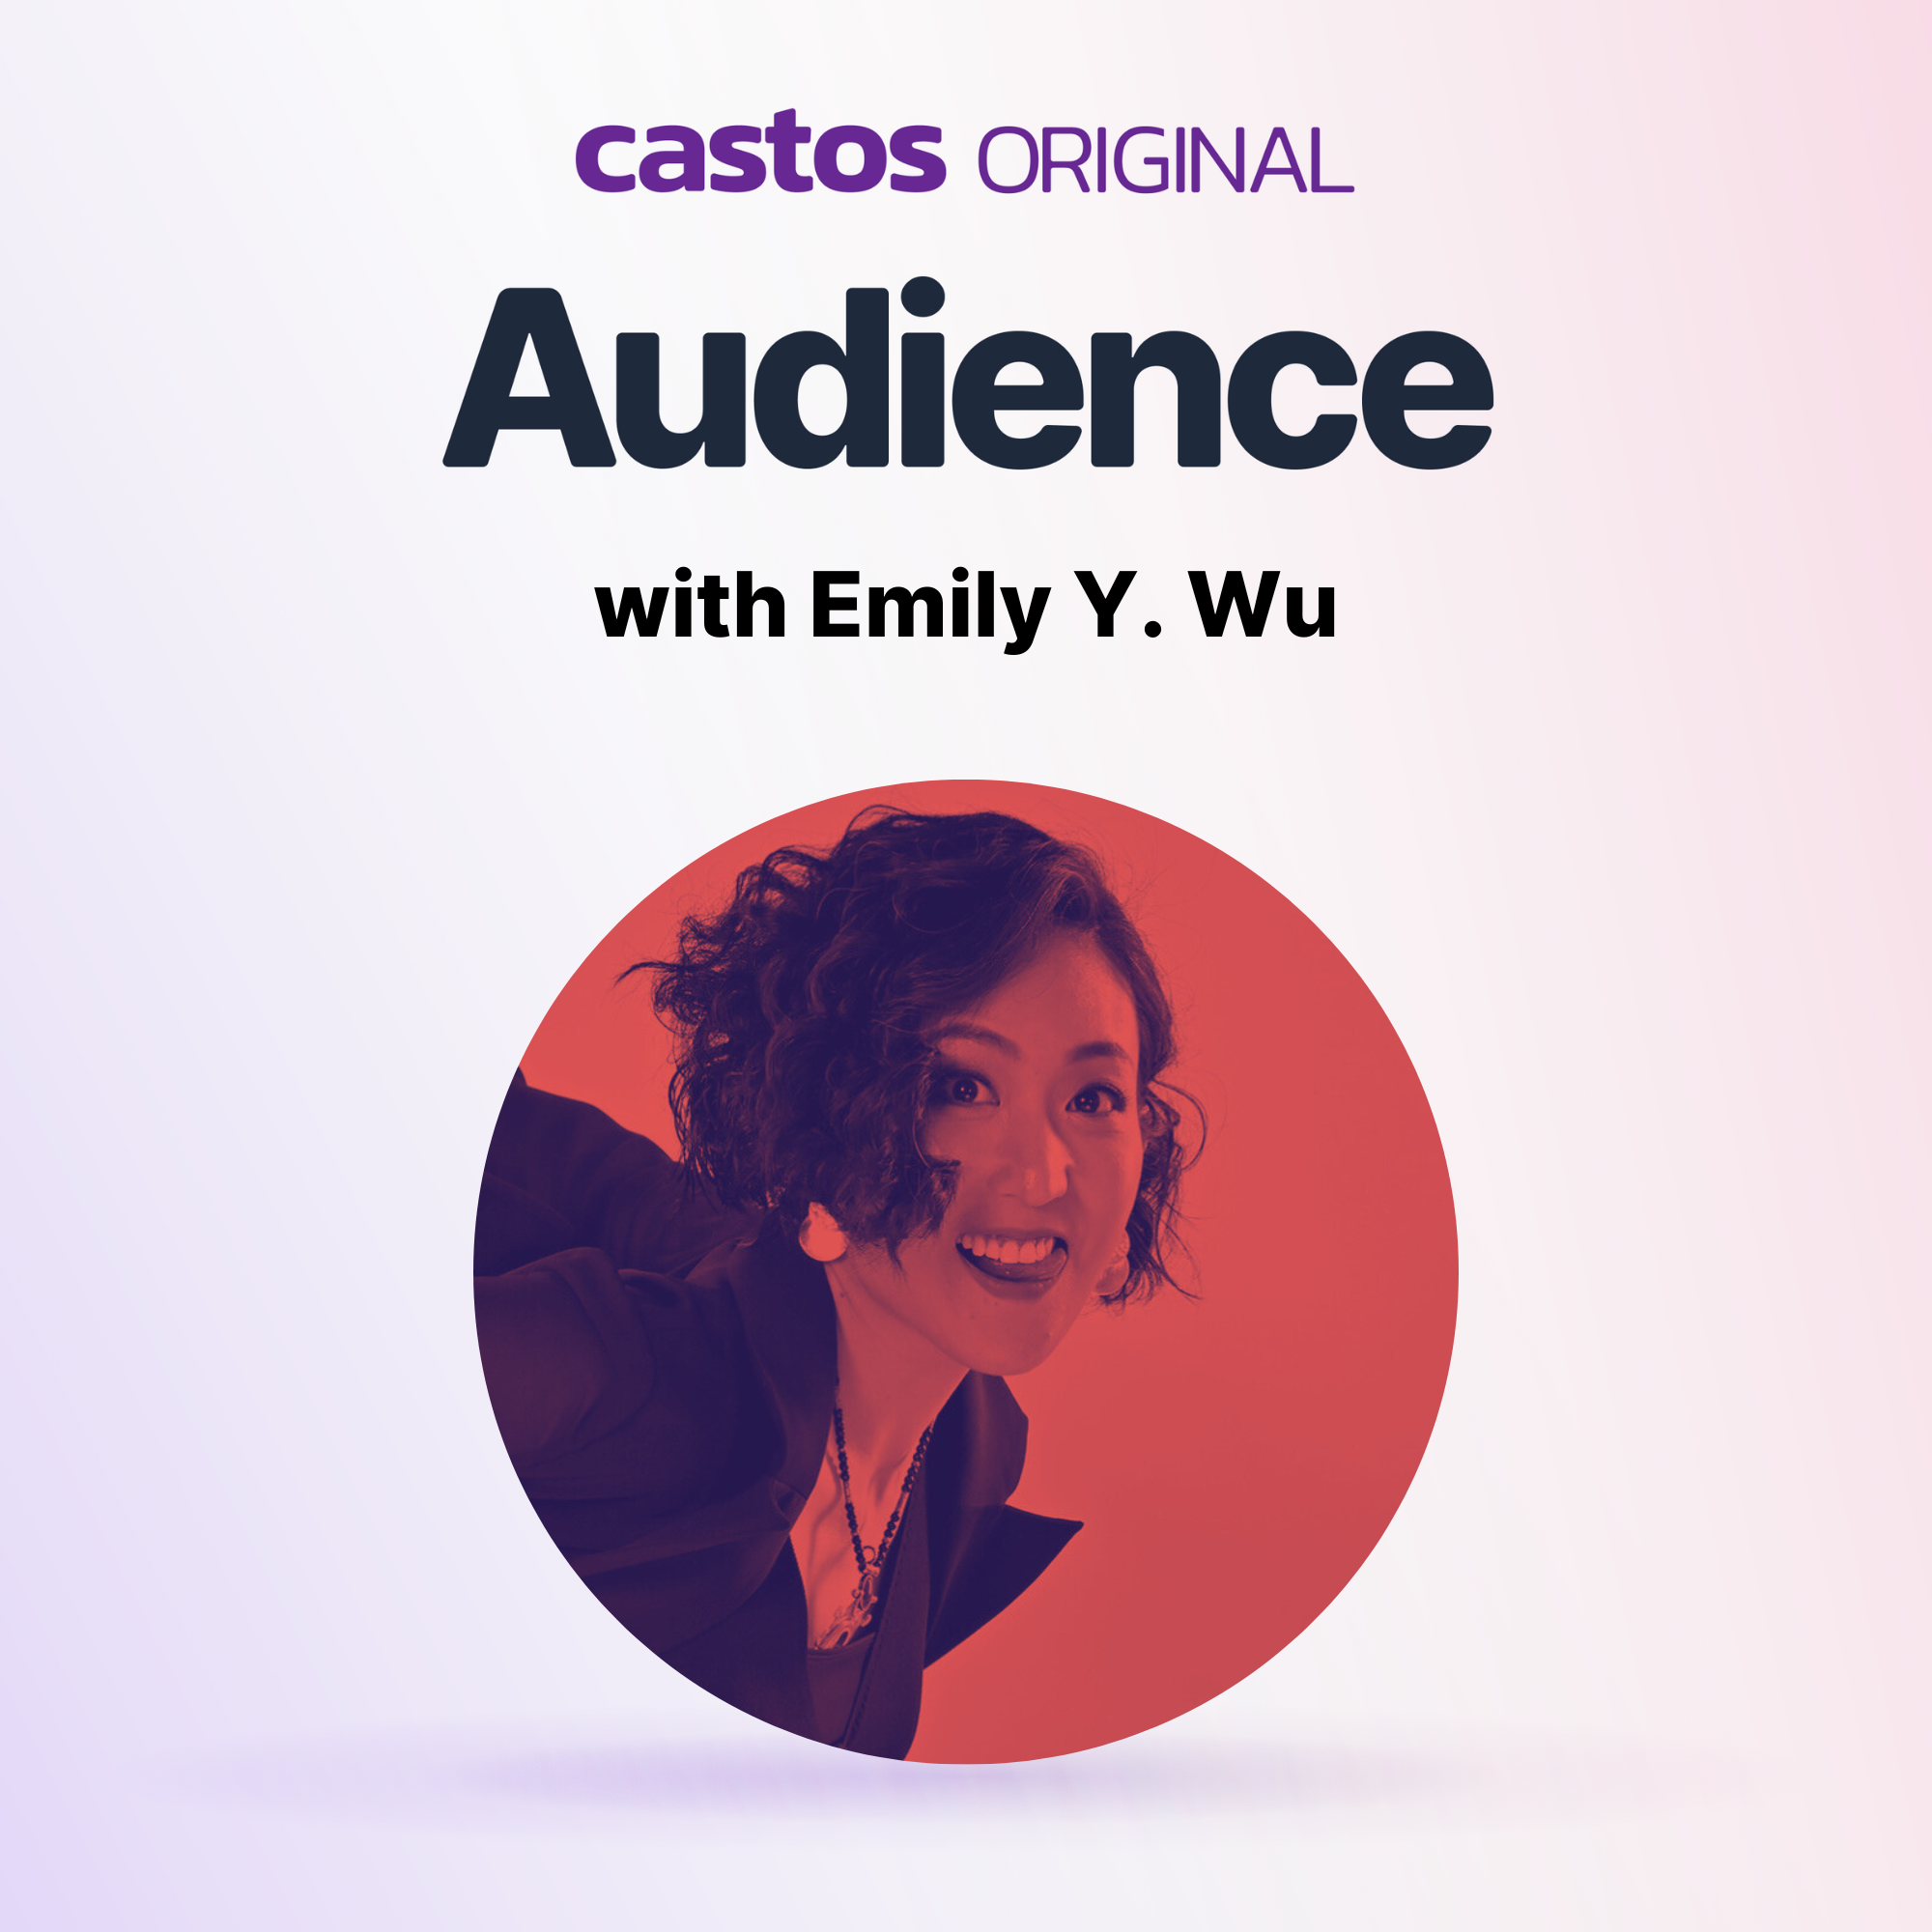 Entertainment in a Time of Crisis with Emily Y. Wu 